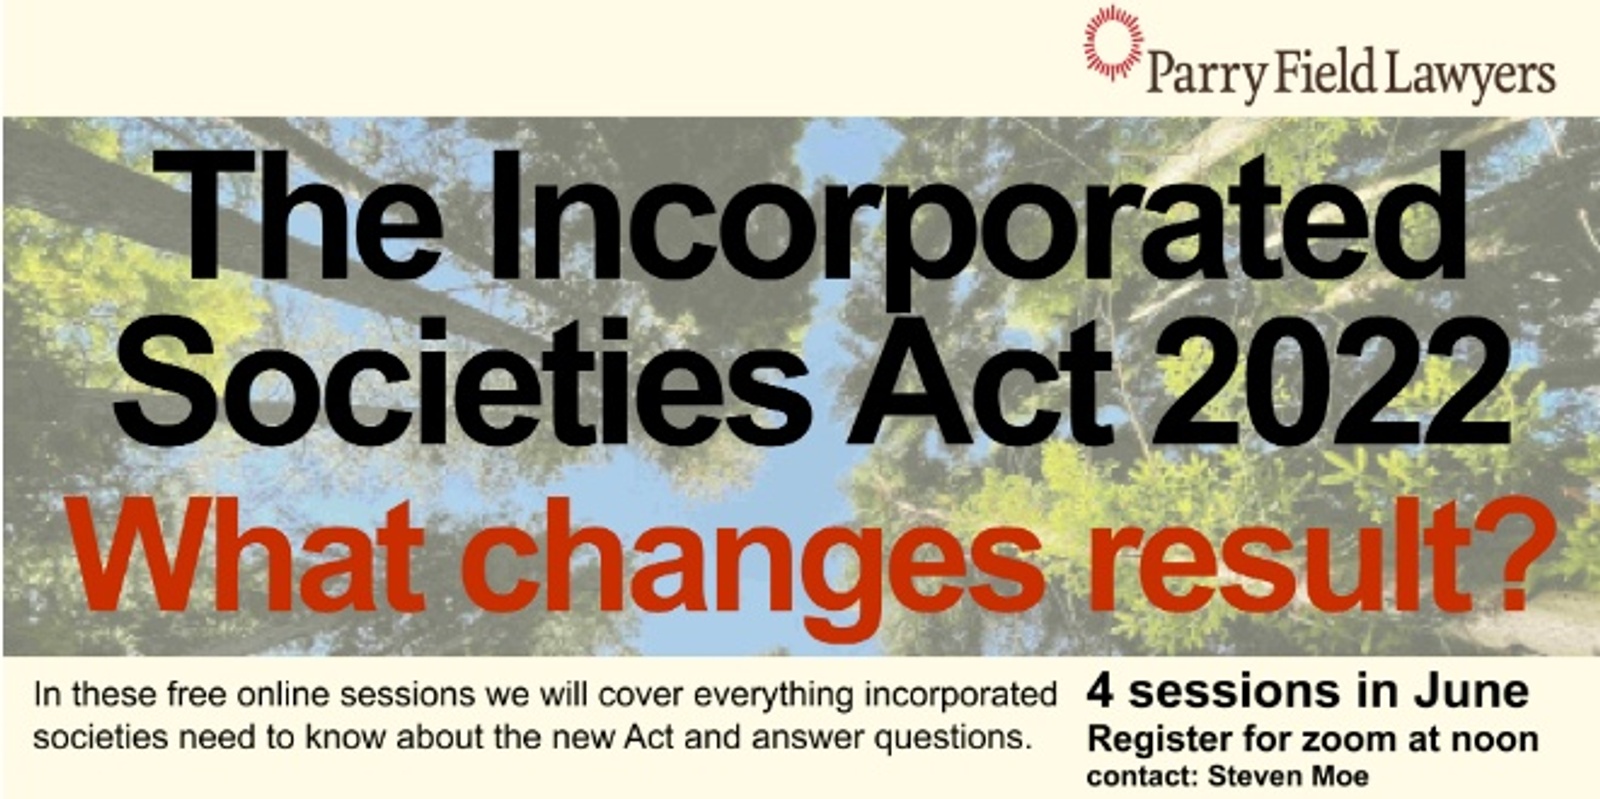 The New Incorporated Societies Act 2022: What changes result?